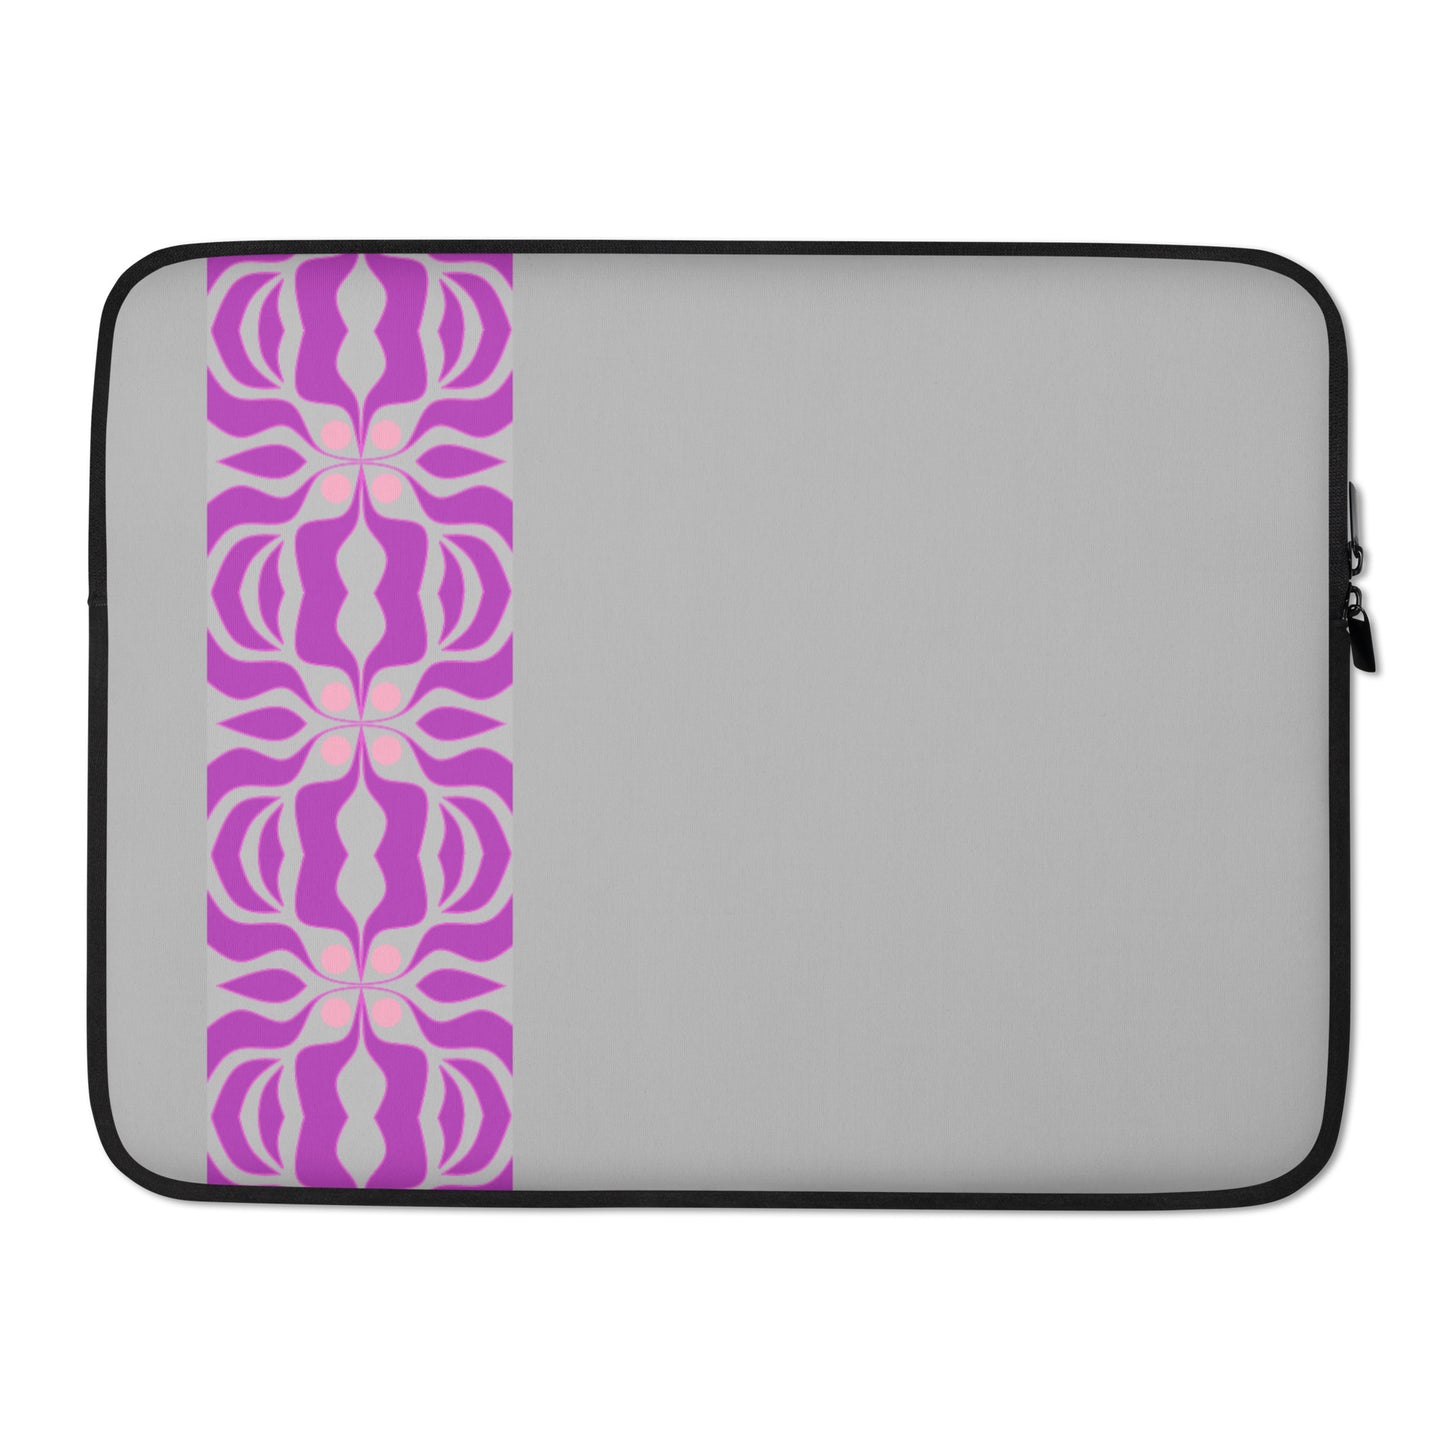 Laptop Sleeve with gray and purple print